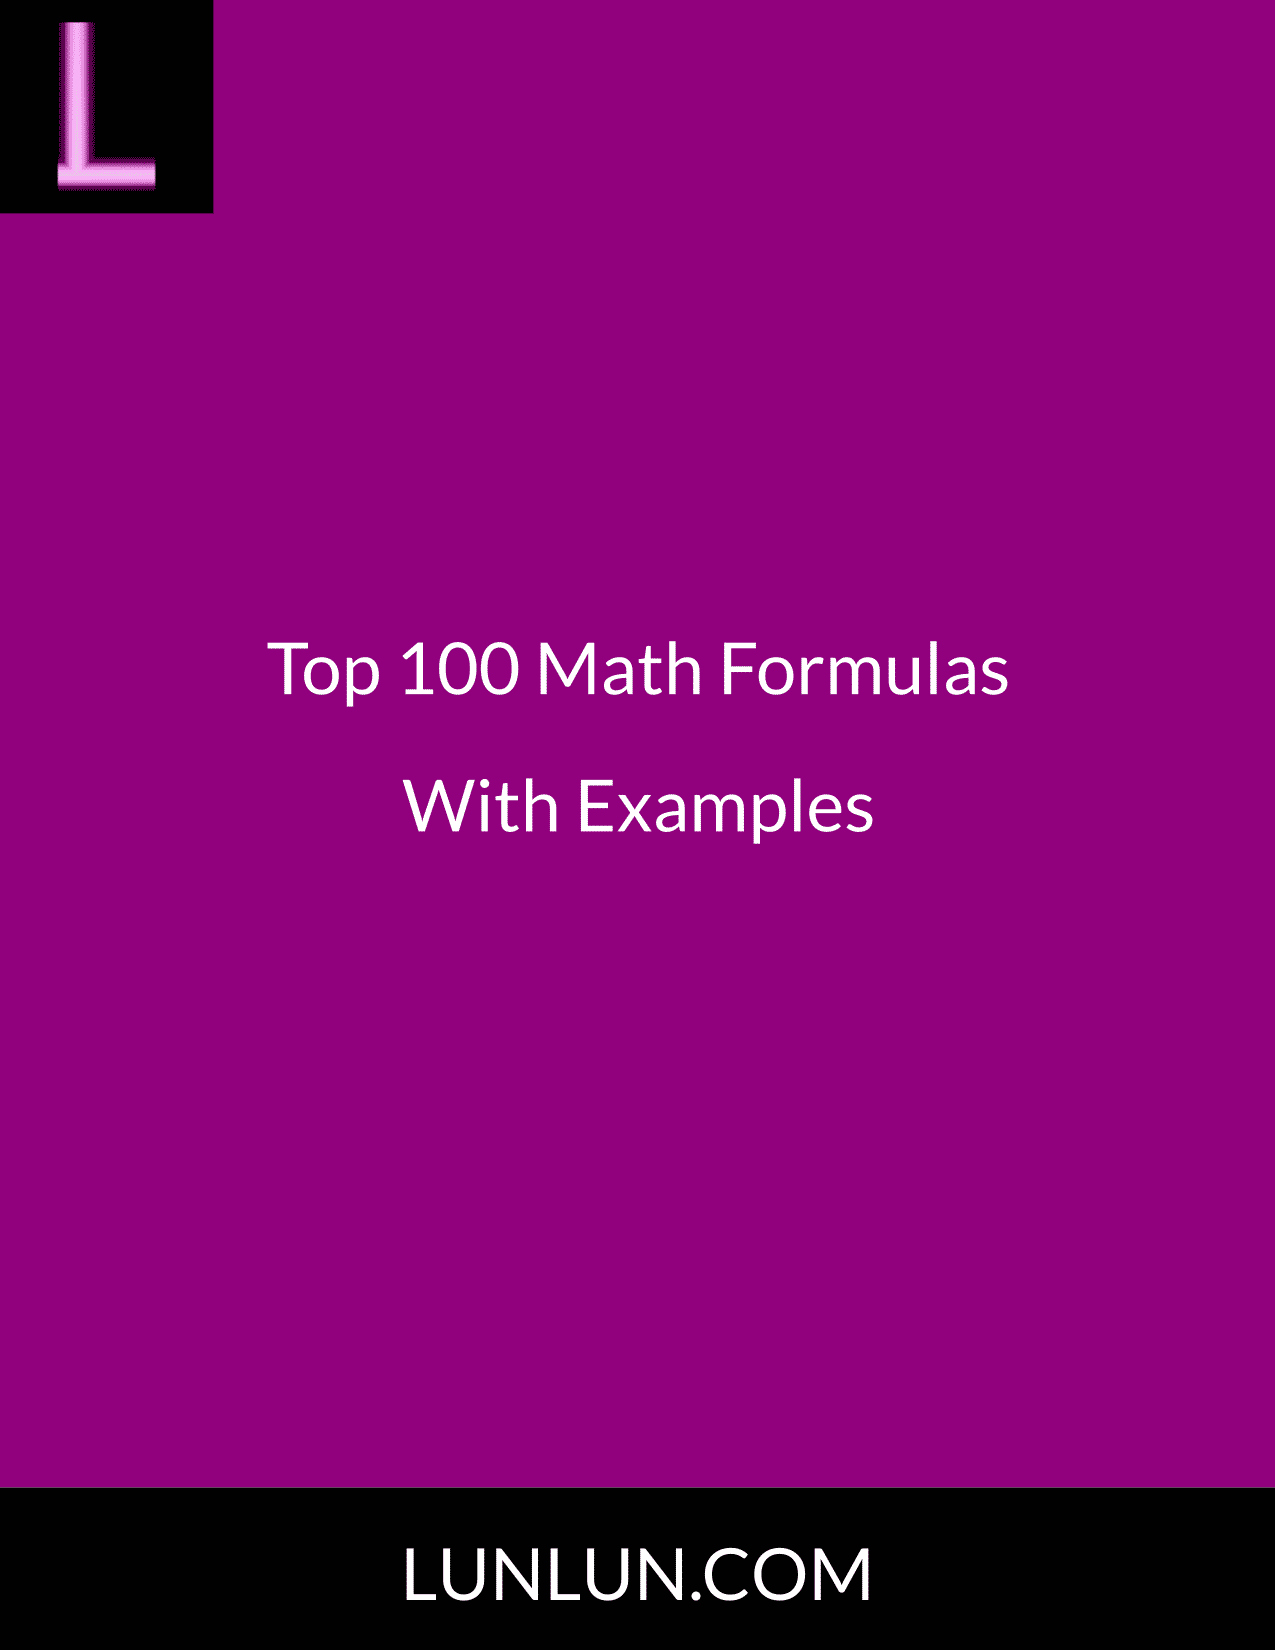 Top 100 Math Formulas With Examples